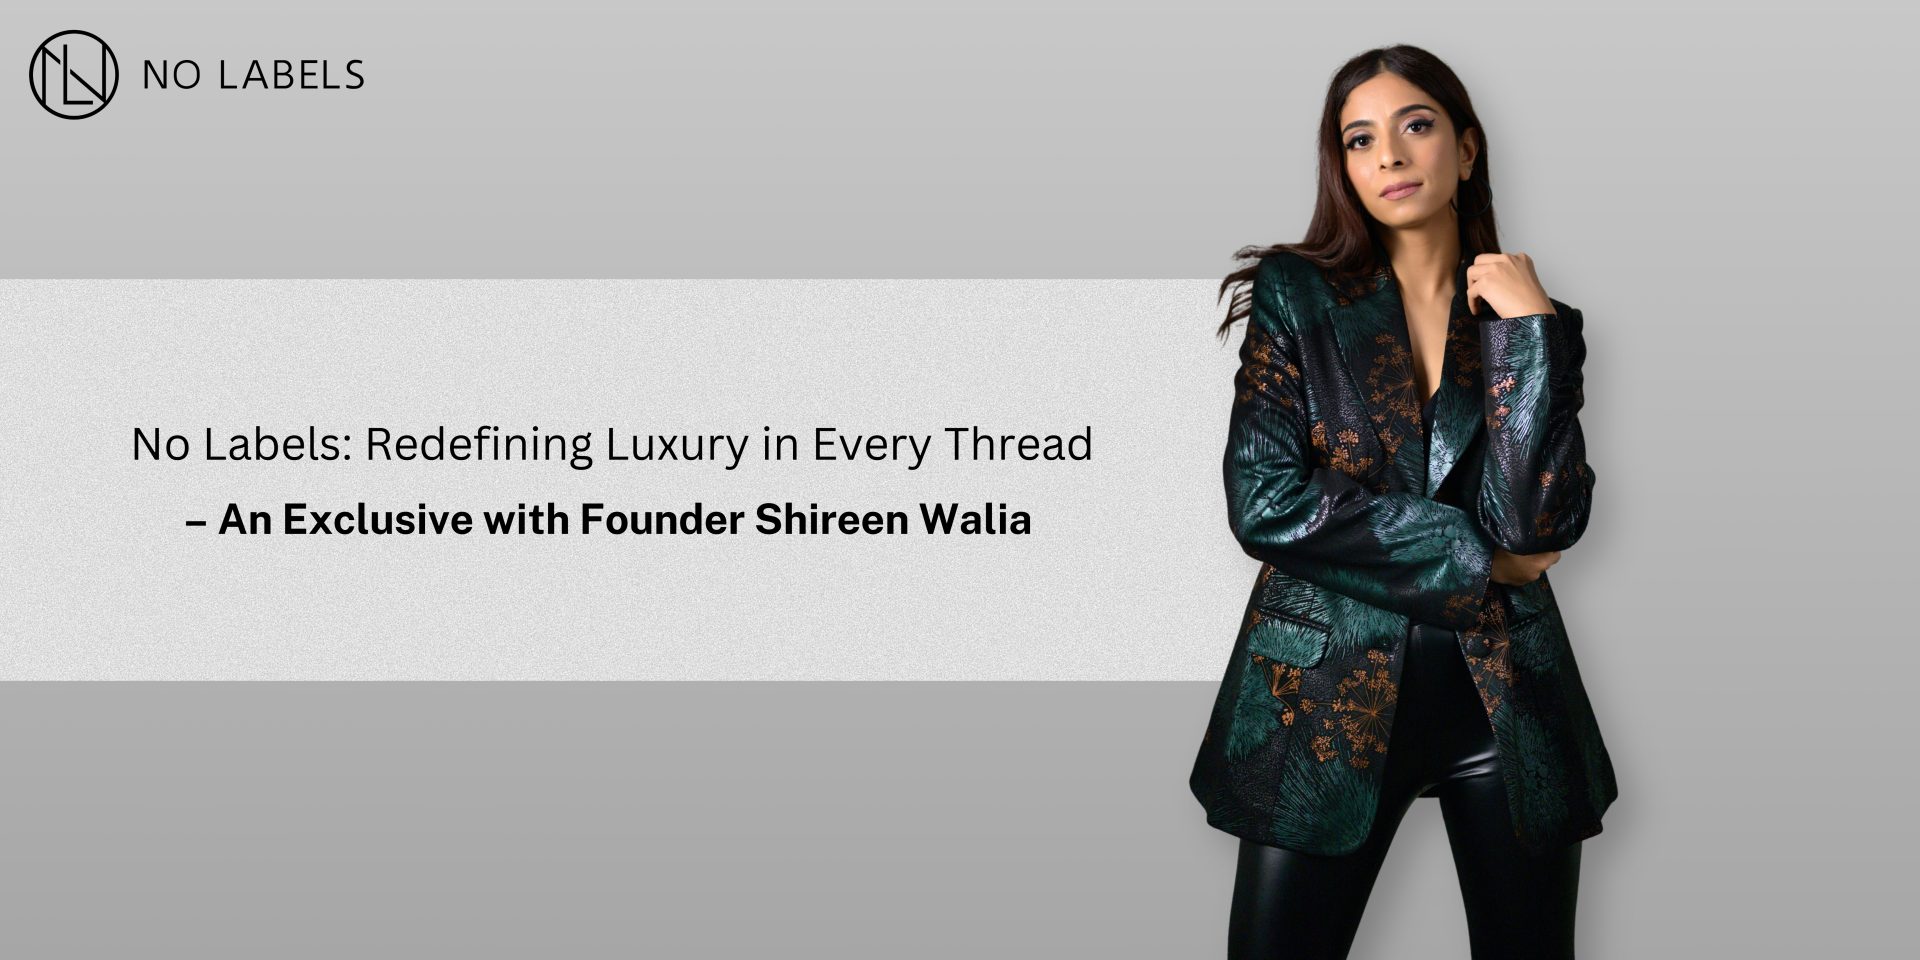 No Labels: Redefining Luxury in Every Thread - An Exclusive with Founder Shireen Walia